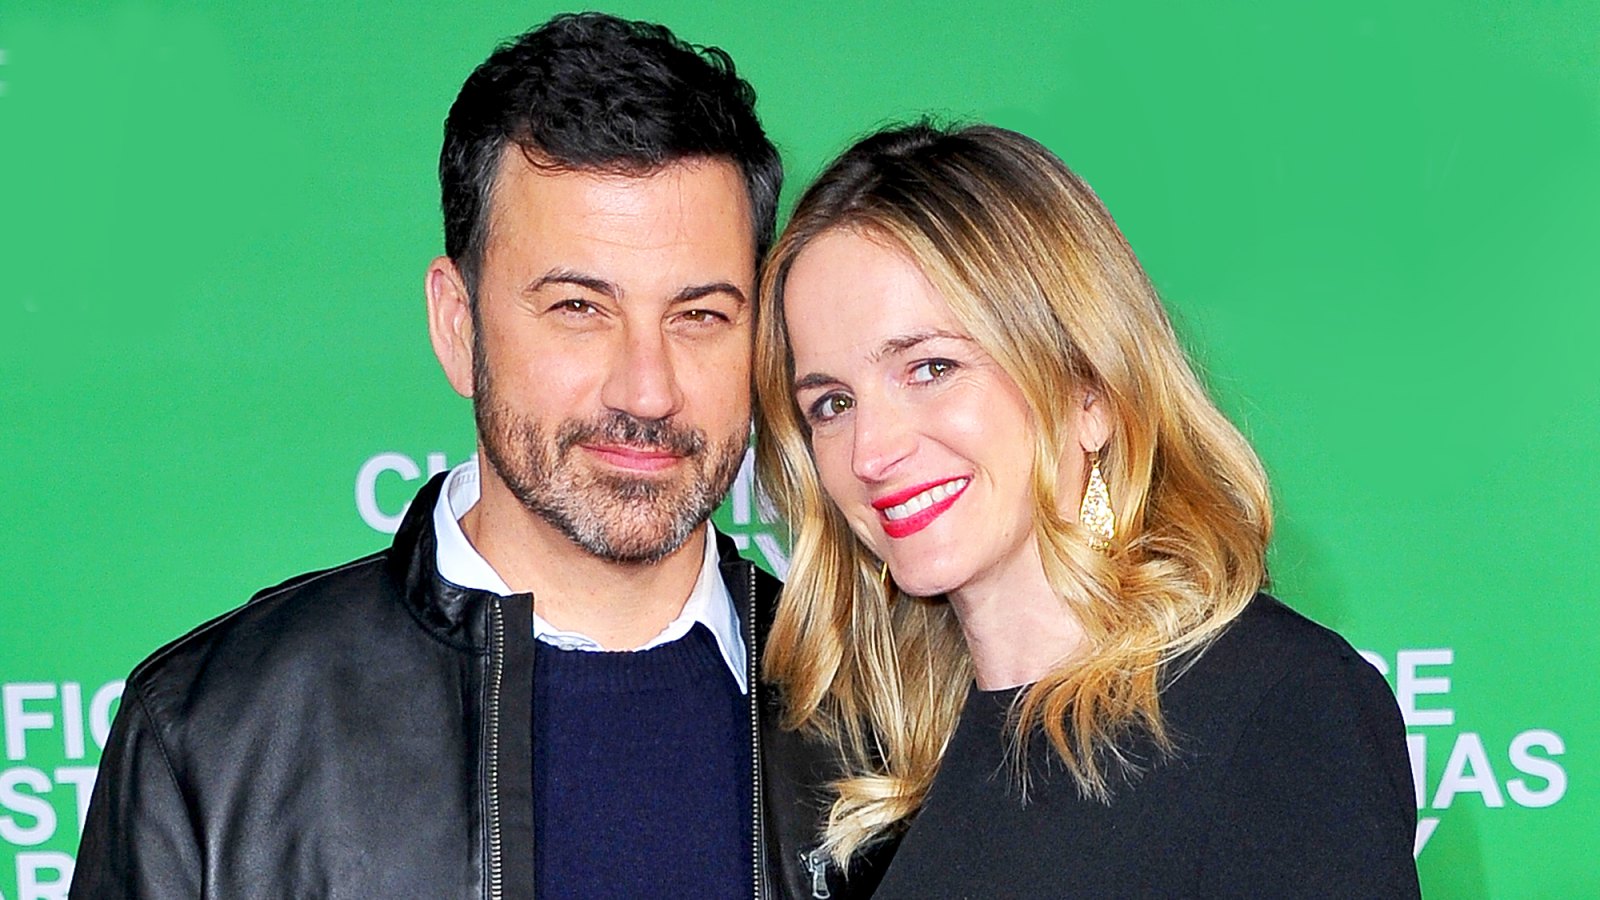 Jimmy Kimmel and wife Molly McNearney attend the premiere of "Office Christmas Party" at Regency Village Theatre in Westwood, California.